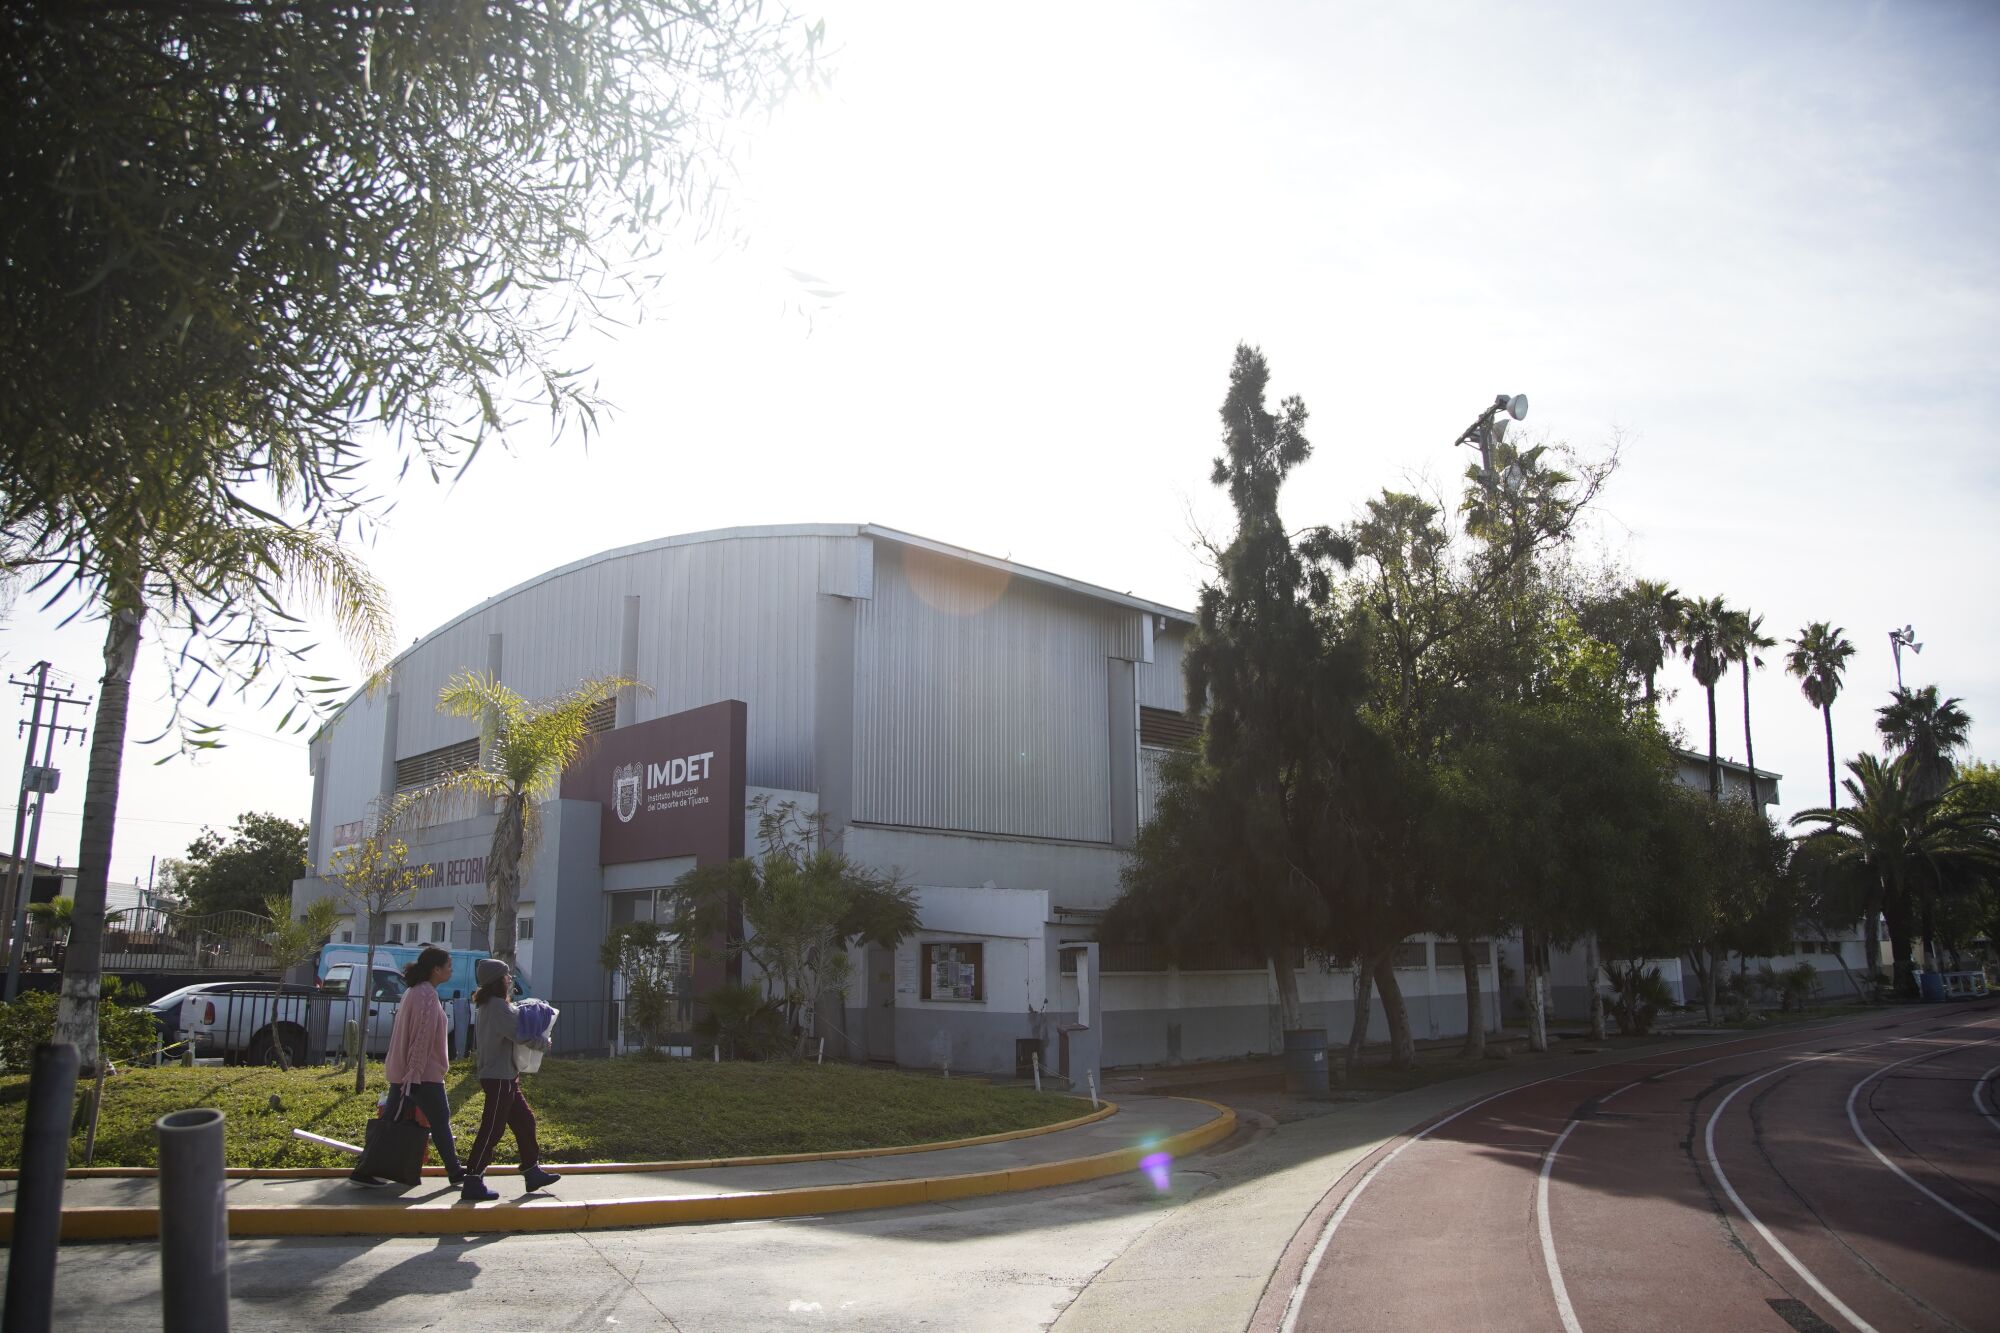 Outside the Unidad Deportiva Reforma, a sports complex